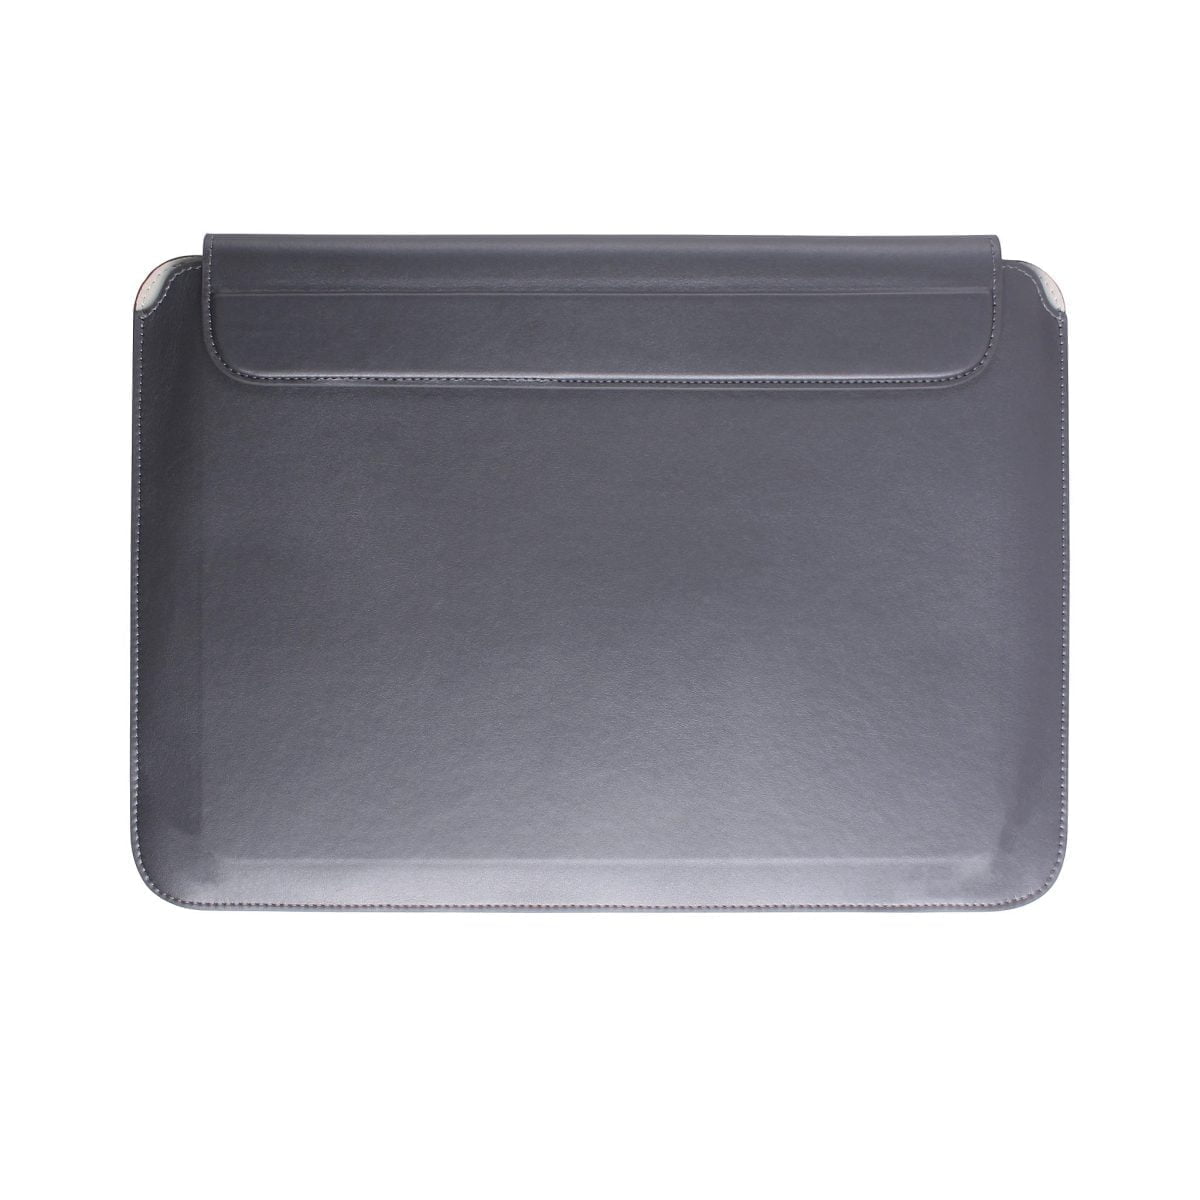 Jcp2393 Multifunction Sleeve Stand Gray &Amp;Lt;H1&Amp;Gt;Ergo Multifunction Sleeve Stand (Gray)&Amp;Lt;/H1&Amp;Gt; The Elegantly Compact Multifunction Sleeve Stand Is A Practical Carry Accessory That Allows You To Use Your Laptop In A More Ergonomic Position When You’re On The Go And Minimize Neck Strain. Featuring A Built-In Stand That Props Up Your Laptop To A 15° Or 30° Position, Magnetic Closures And Made From A Durable Pu Material, The Multifunction Sleeve Stand Is Versatile Travel Accessory. &Amp;Lt;Ul&Amp;Gt; &Amp;Lt;Li&Amp;Gt;Ergonomic Riser Stand Holds Laptop At 15° Or 30°&Amp;Lt;/Li&Amp;Gt; &Amp;Lt;Li&Amp;Gt;Magnetic Closure/Stand For Quick And Easy Setup&Amp;Lt;/Li&Amp;Gt; &Amp;Lt;Li&Amp;Gt;Increases Cooling Airflow Around Laptop&Amp;Lt;/Li&Amp;Gt; &Amp;Lt;Li&Amp;Gt;Durable 3Mm Pu Material&Amp;Lt;/Li&Amp;Gt; &Amp;Lt;/Ul&Amp;Gt; Ergo Multifunction Sleeve Stand (Gray) - Jcp2393 Ergo Multifunction Sleeve Stand (Gray) - Jcp2393